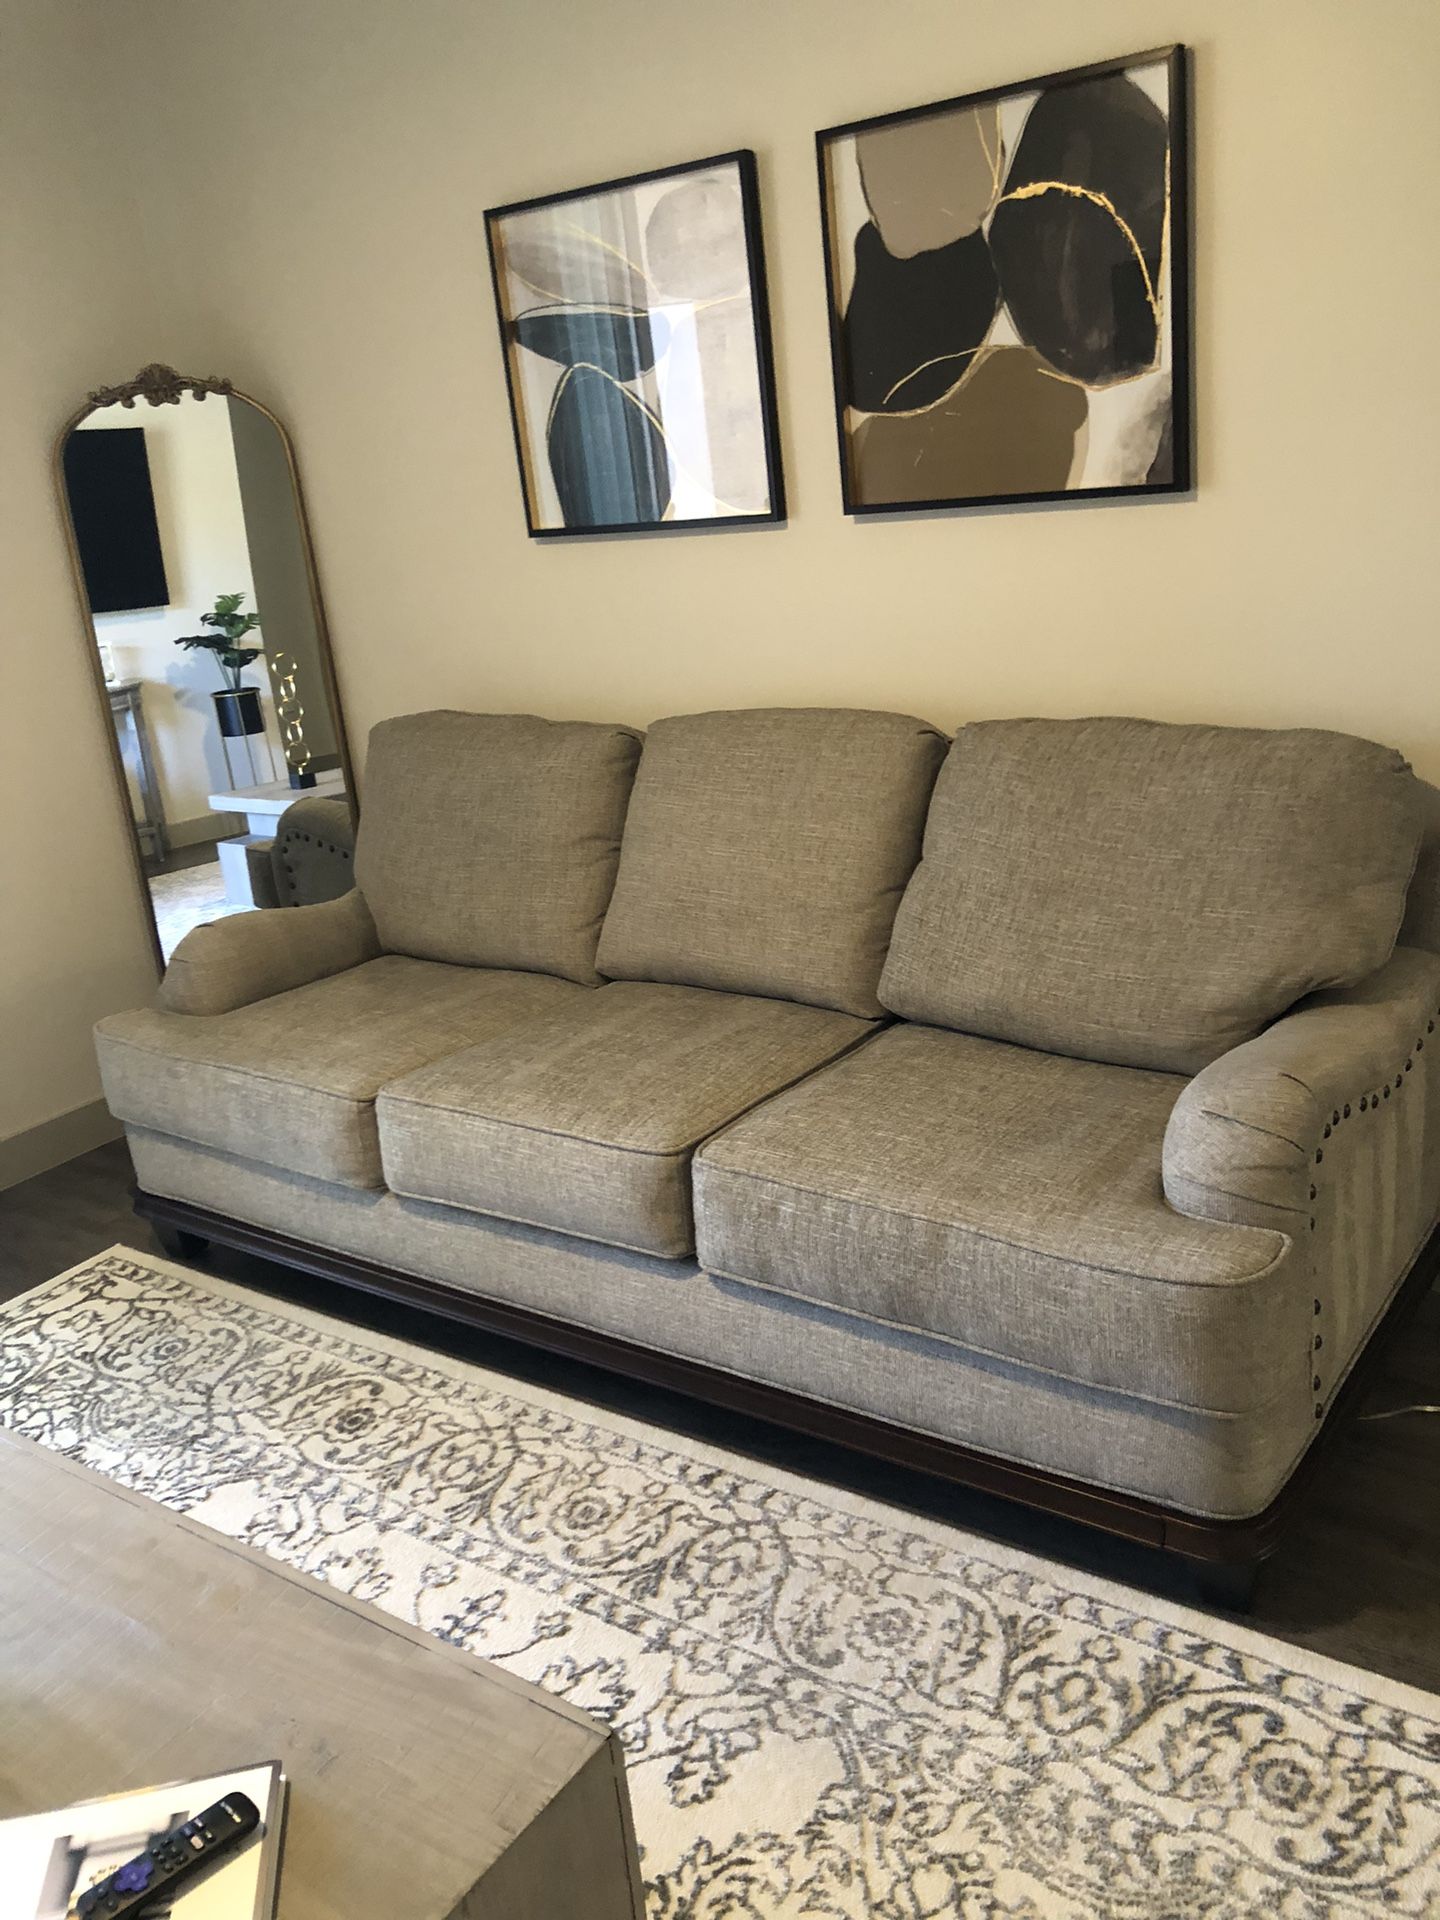 Couch And Chair Sofa Set 